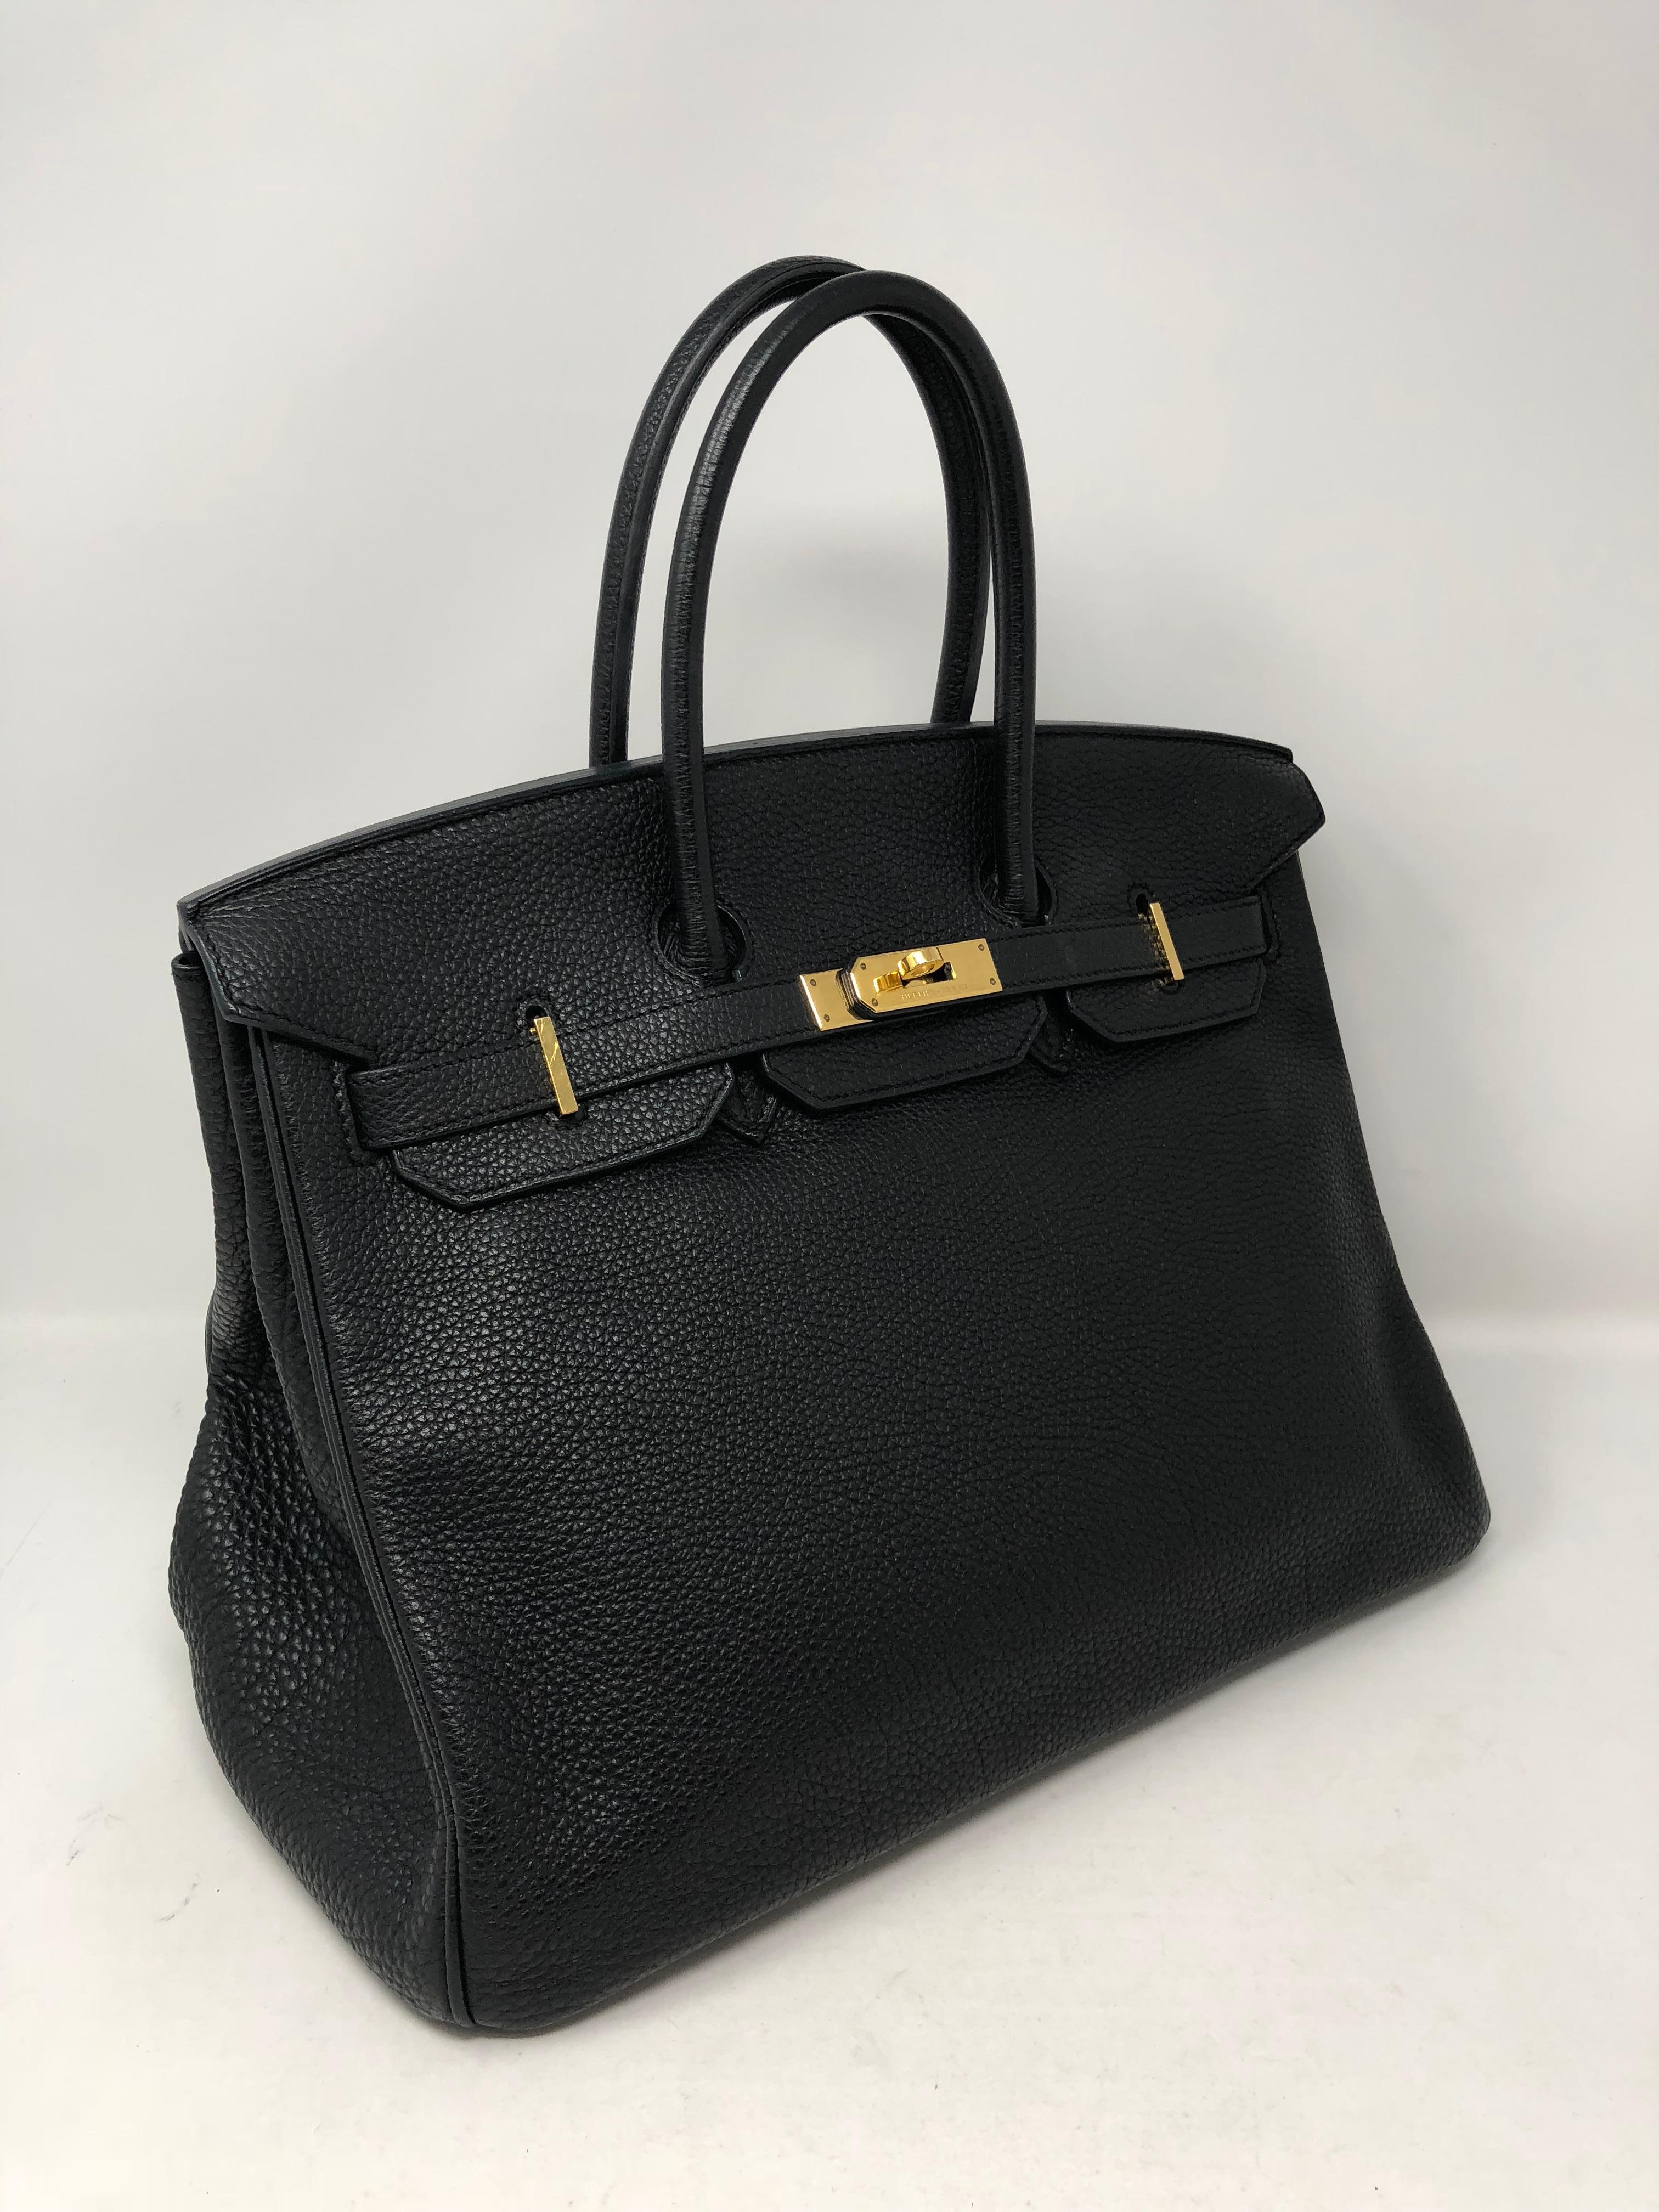 Hermes Black Birkin 35 togo leather with gold hardware. Beautiful bag in most wanted color. Classic size 35 in great condition. Comes with matching clochette, lock and keys. Guaranteed authentic.  